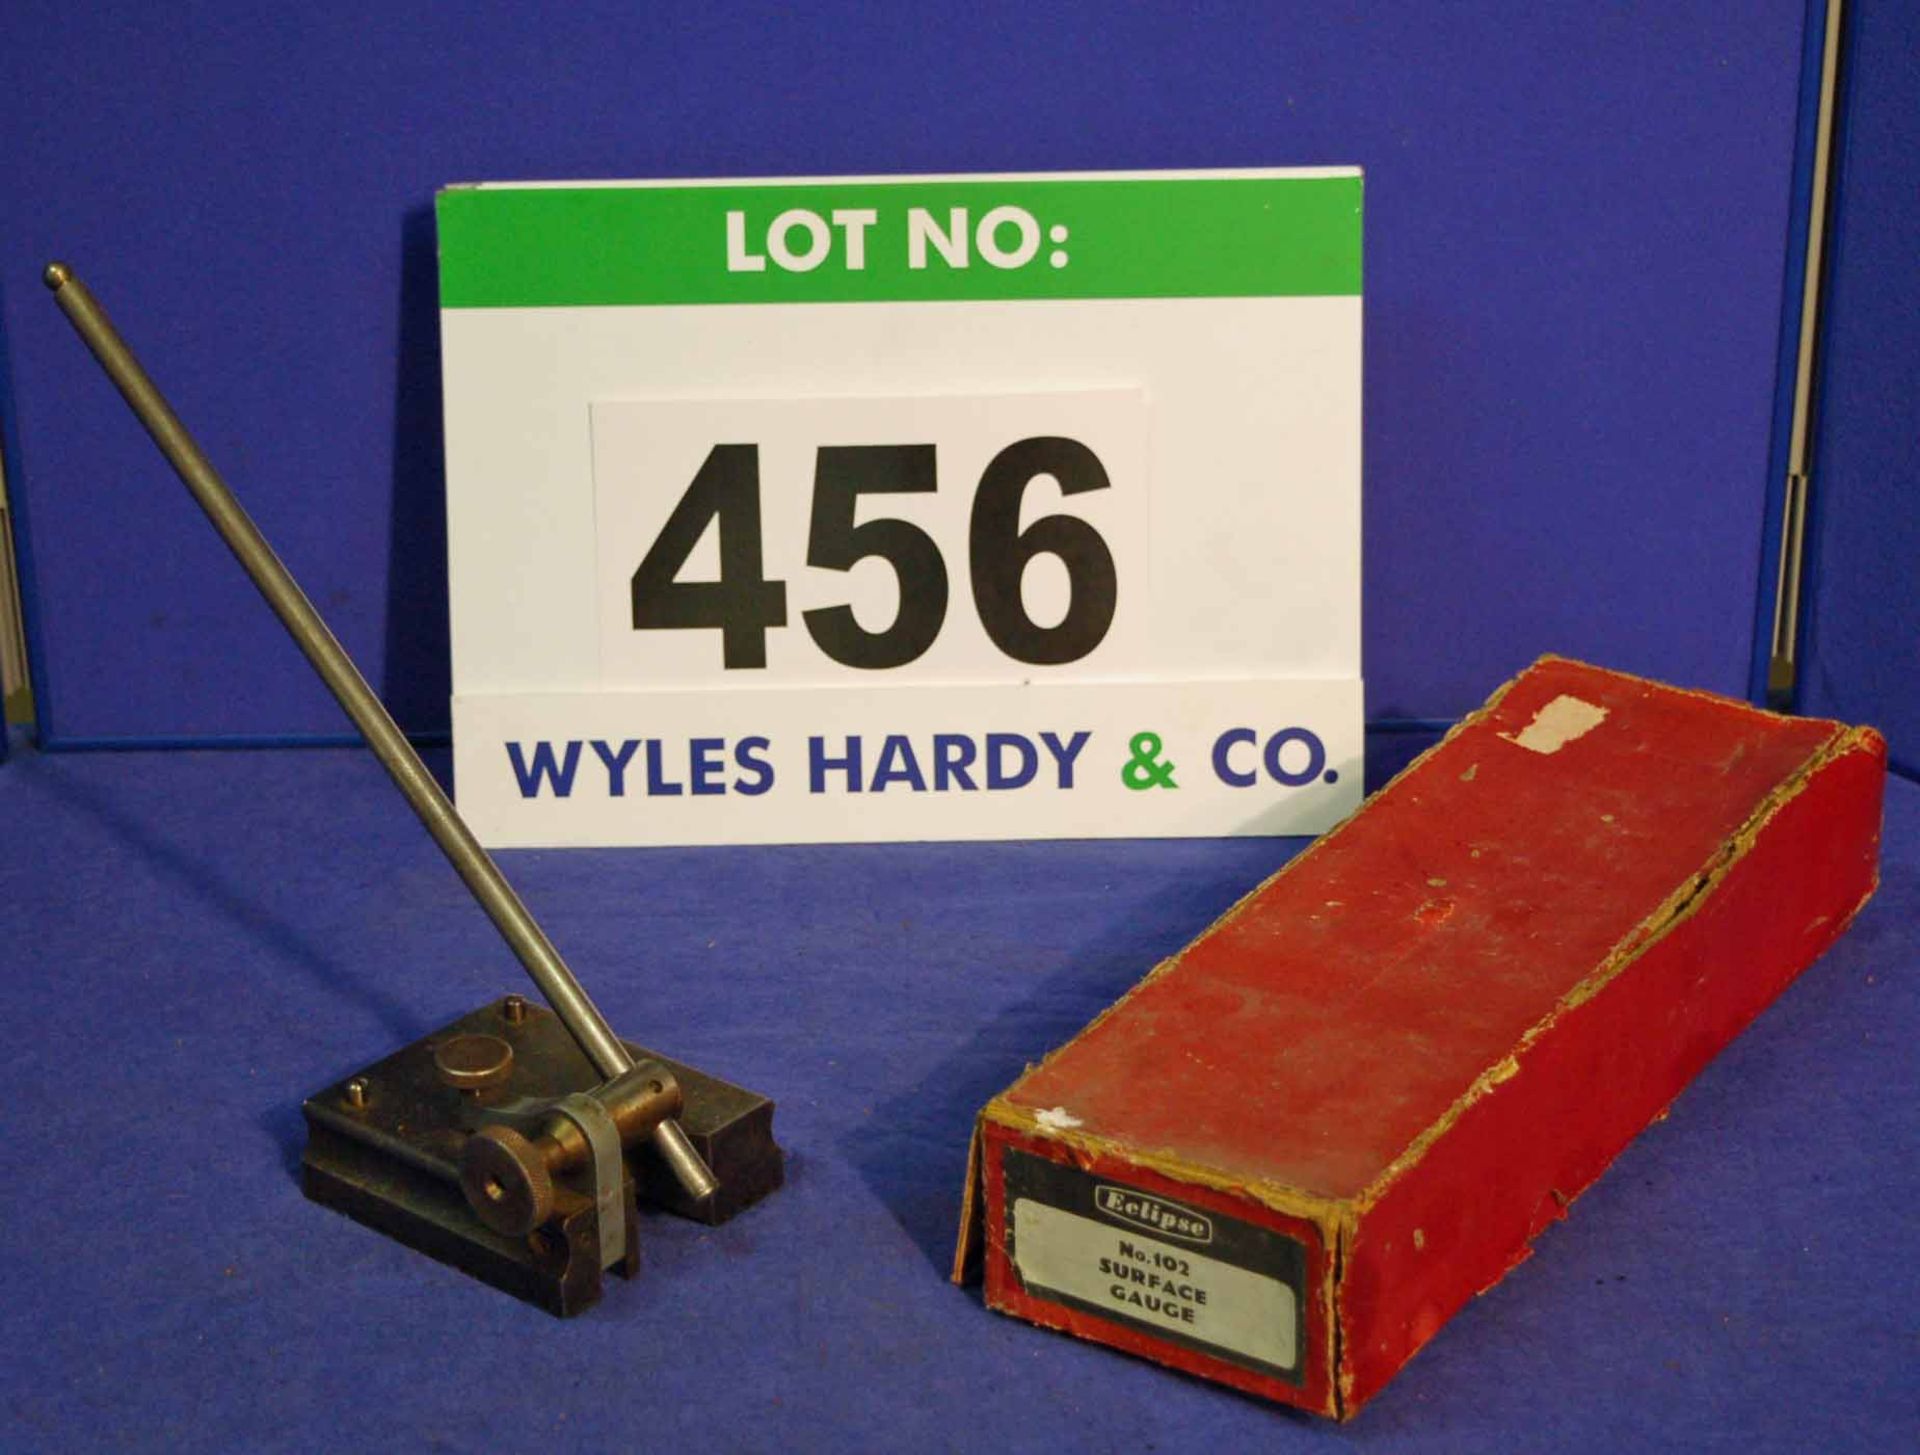 A 12 inch Gauge Stand in Red Cardboard Box